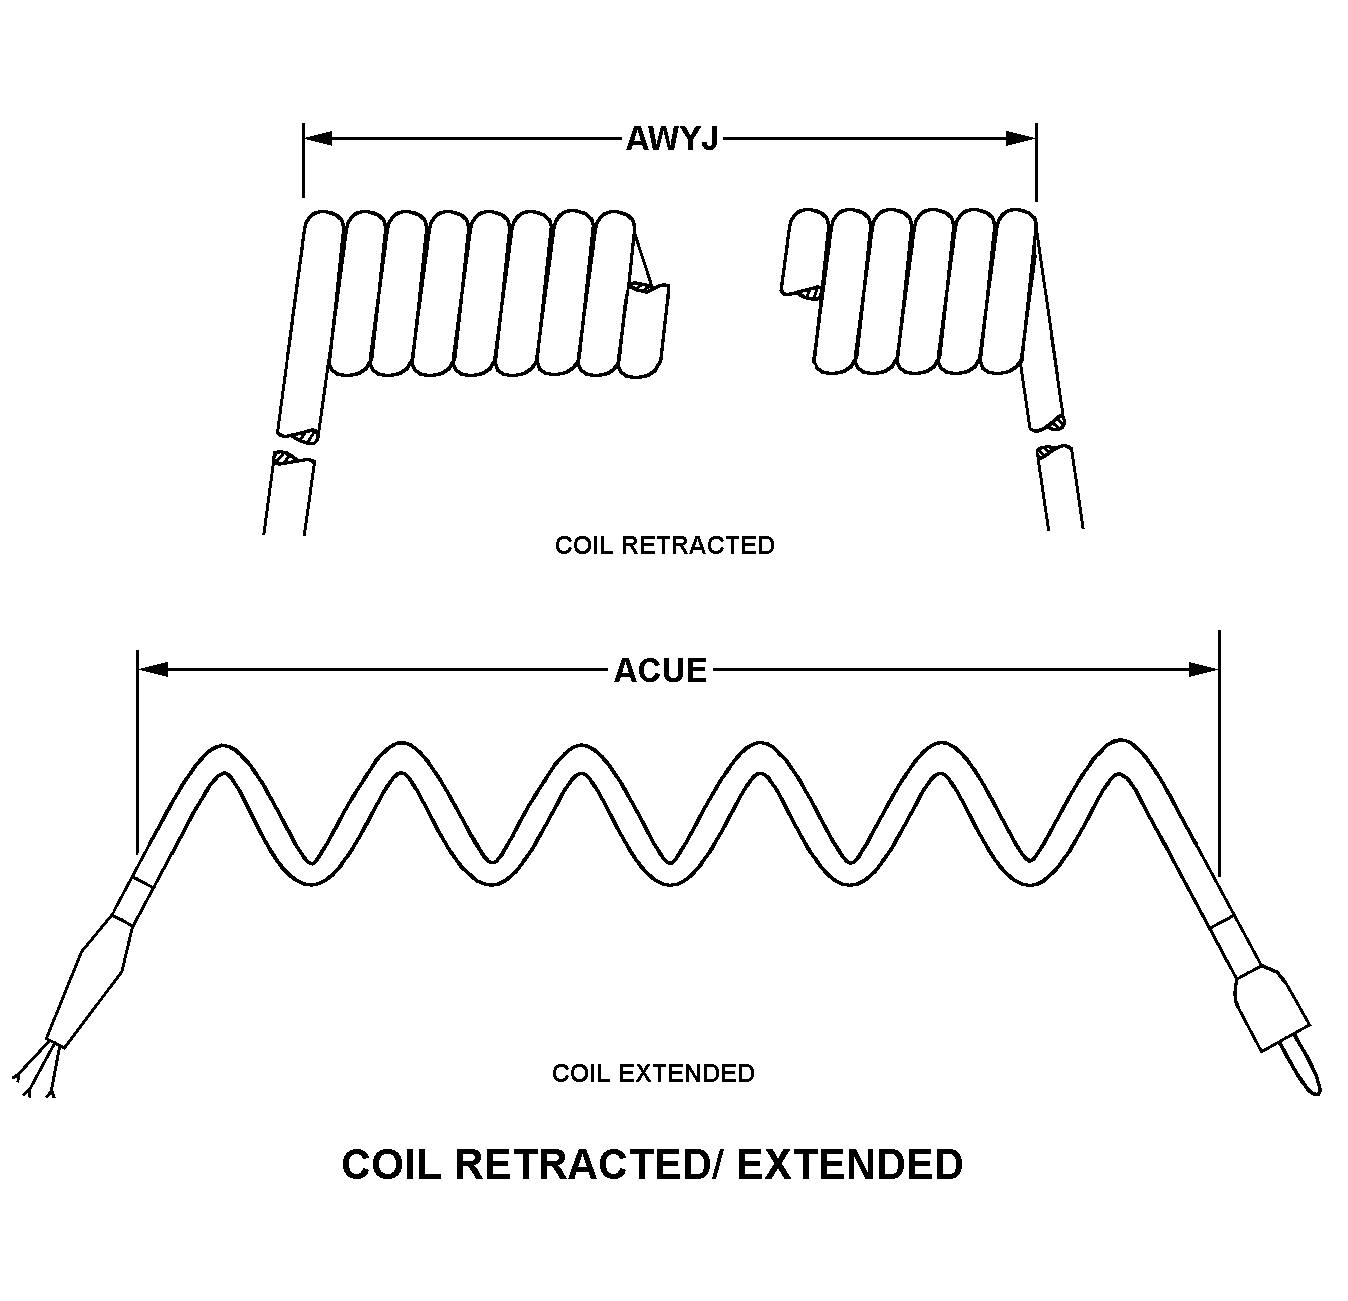 COIL RETRACTED/EXTENDED style nsn 6150-01-391-2020